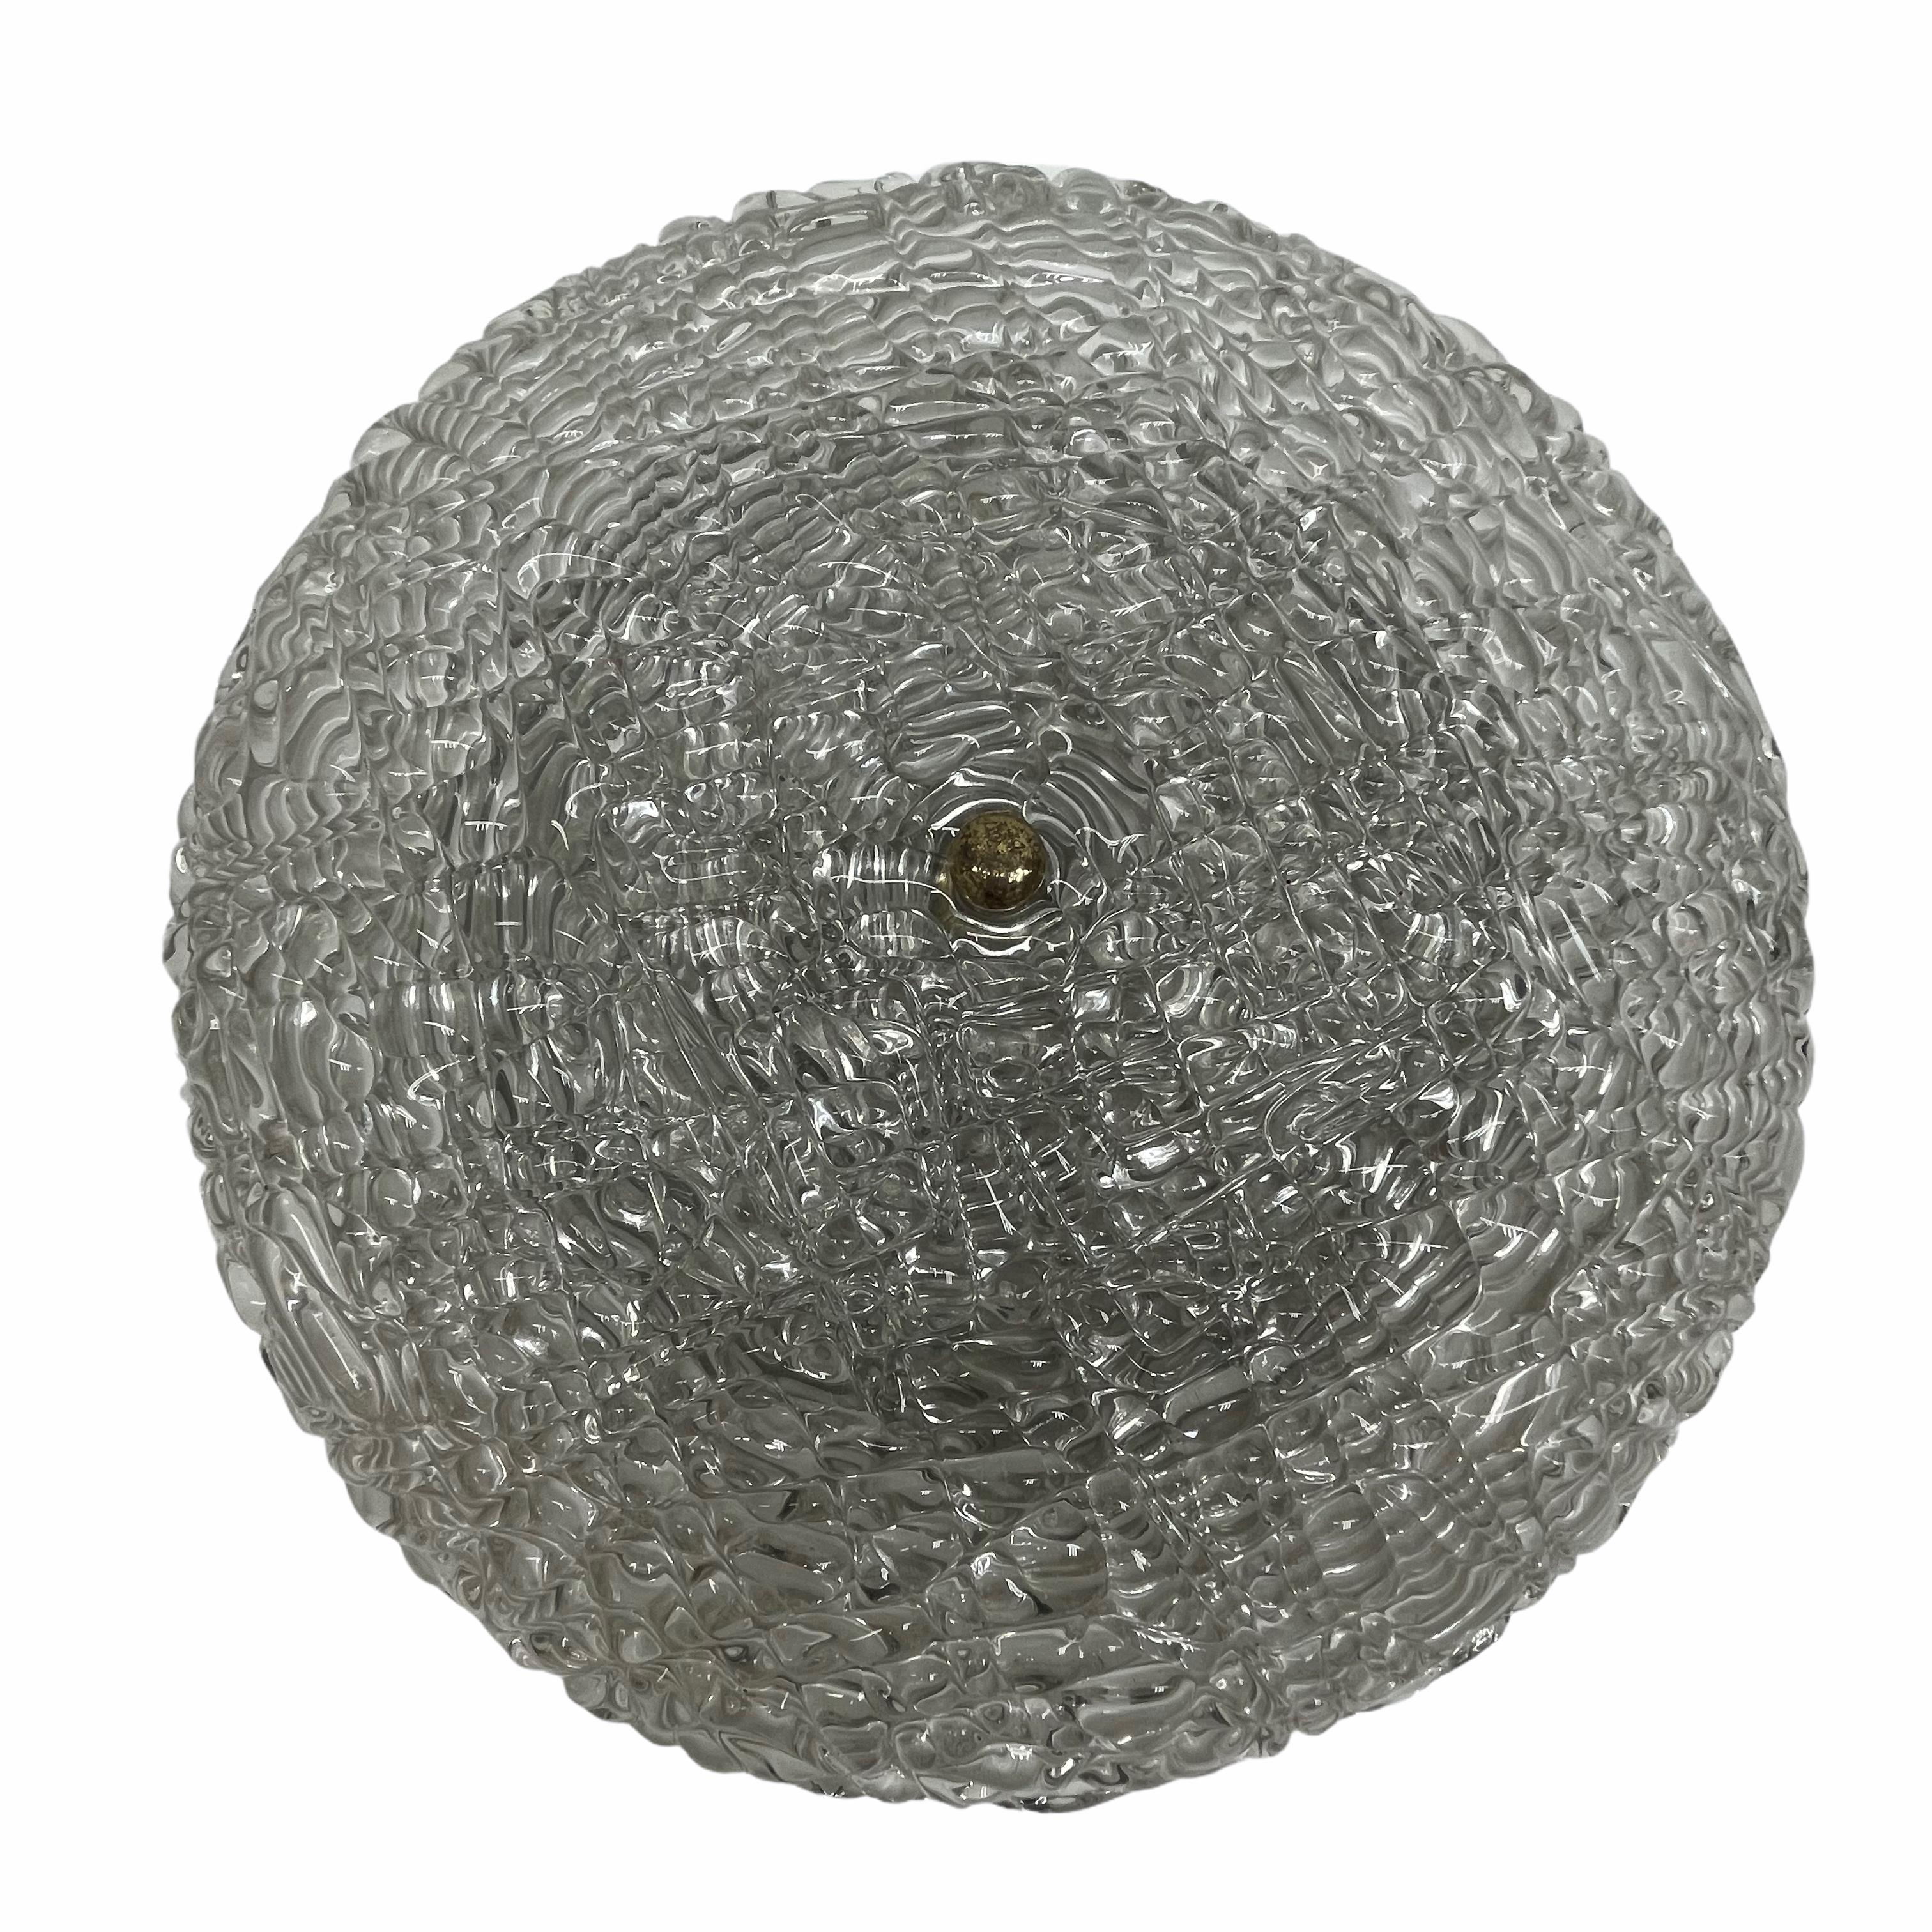 A stunning large textured clear glass flush mount by Kalmar Leuchten. It has a very heavy glass bowl on a metal frame. The Fixture requires three European E14 / 110 Volt Candelabra bulbs, each bulb up to 40 watts. Lightbulbs pictured are not